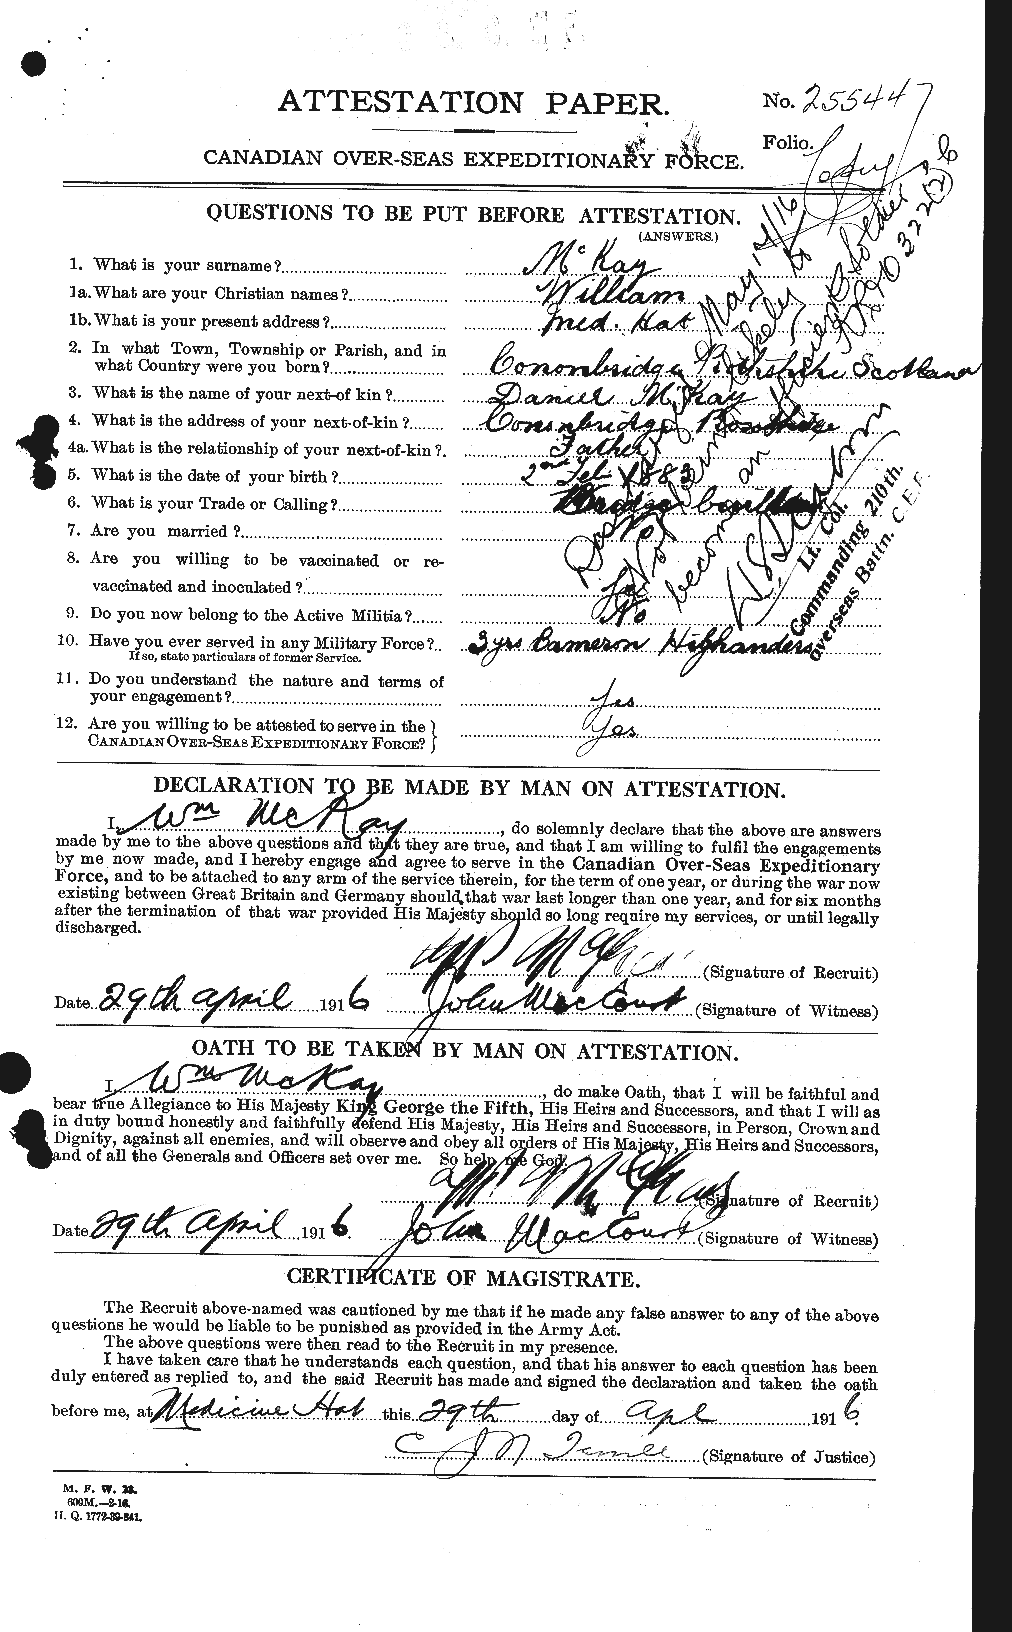 Personnel Records of the First World War - CEF 530224a